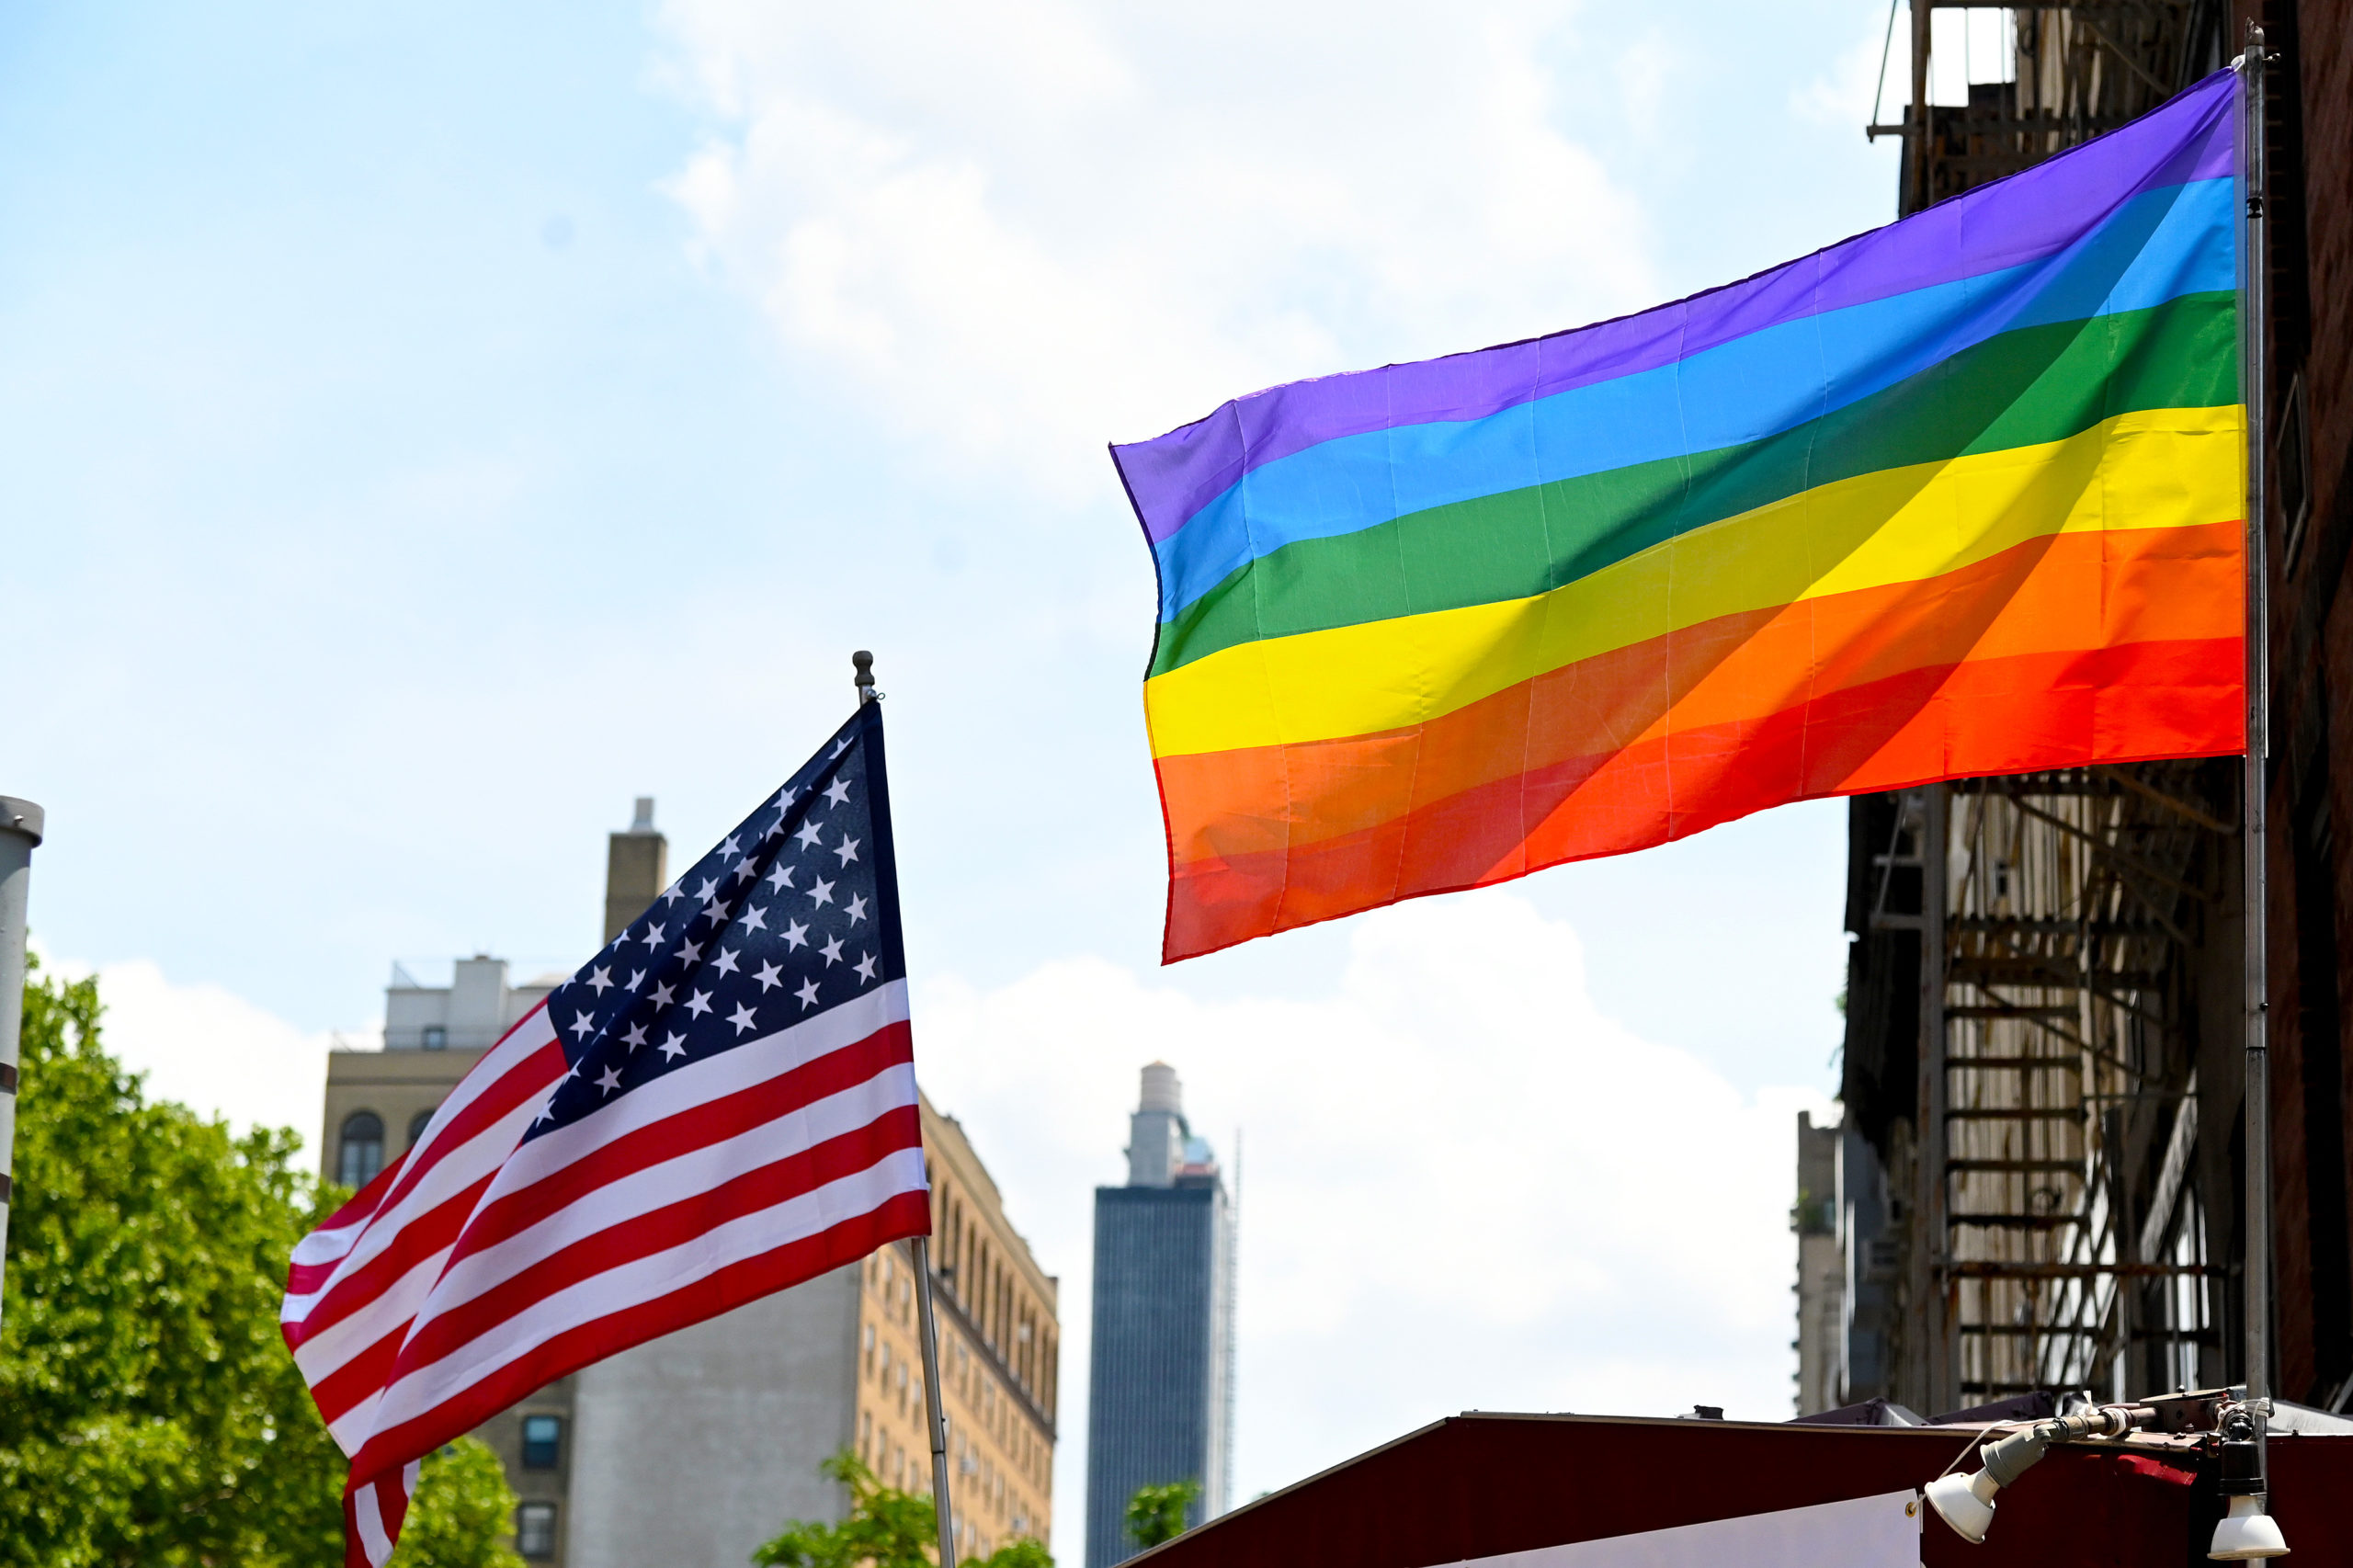 NEW YORK, NEW YORK - JUNE 20: An American Flag and Pride Flag are seen flown in Chelsea on June 20, 2020 in New York City. Due to the ongoing Coronavirus pandemic, this year's march had to be canceled over health concerns. The annual event, which sees millions of attendees, marks it's 50th anniversary since the first march following the Stonewall Inn riots. (Photo by Jamie McCarthy/Getty Images,)